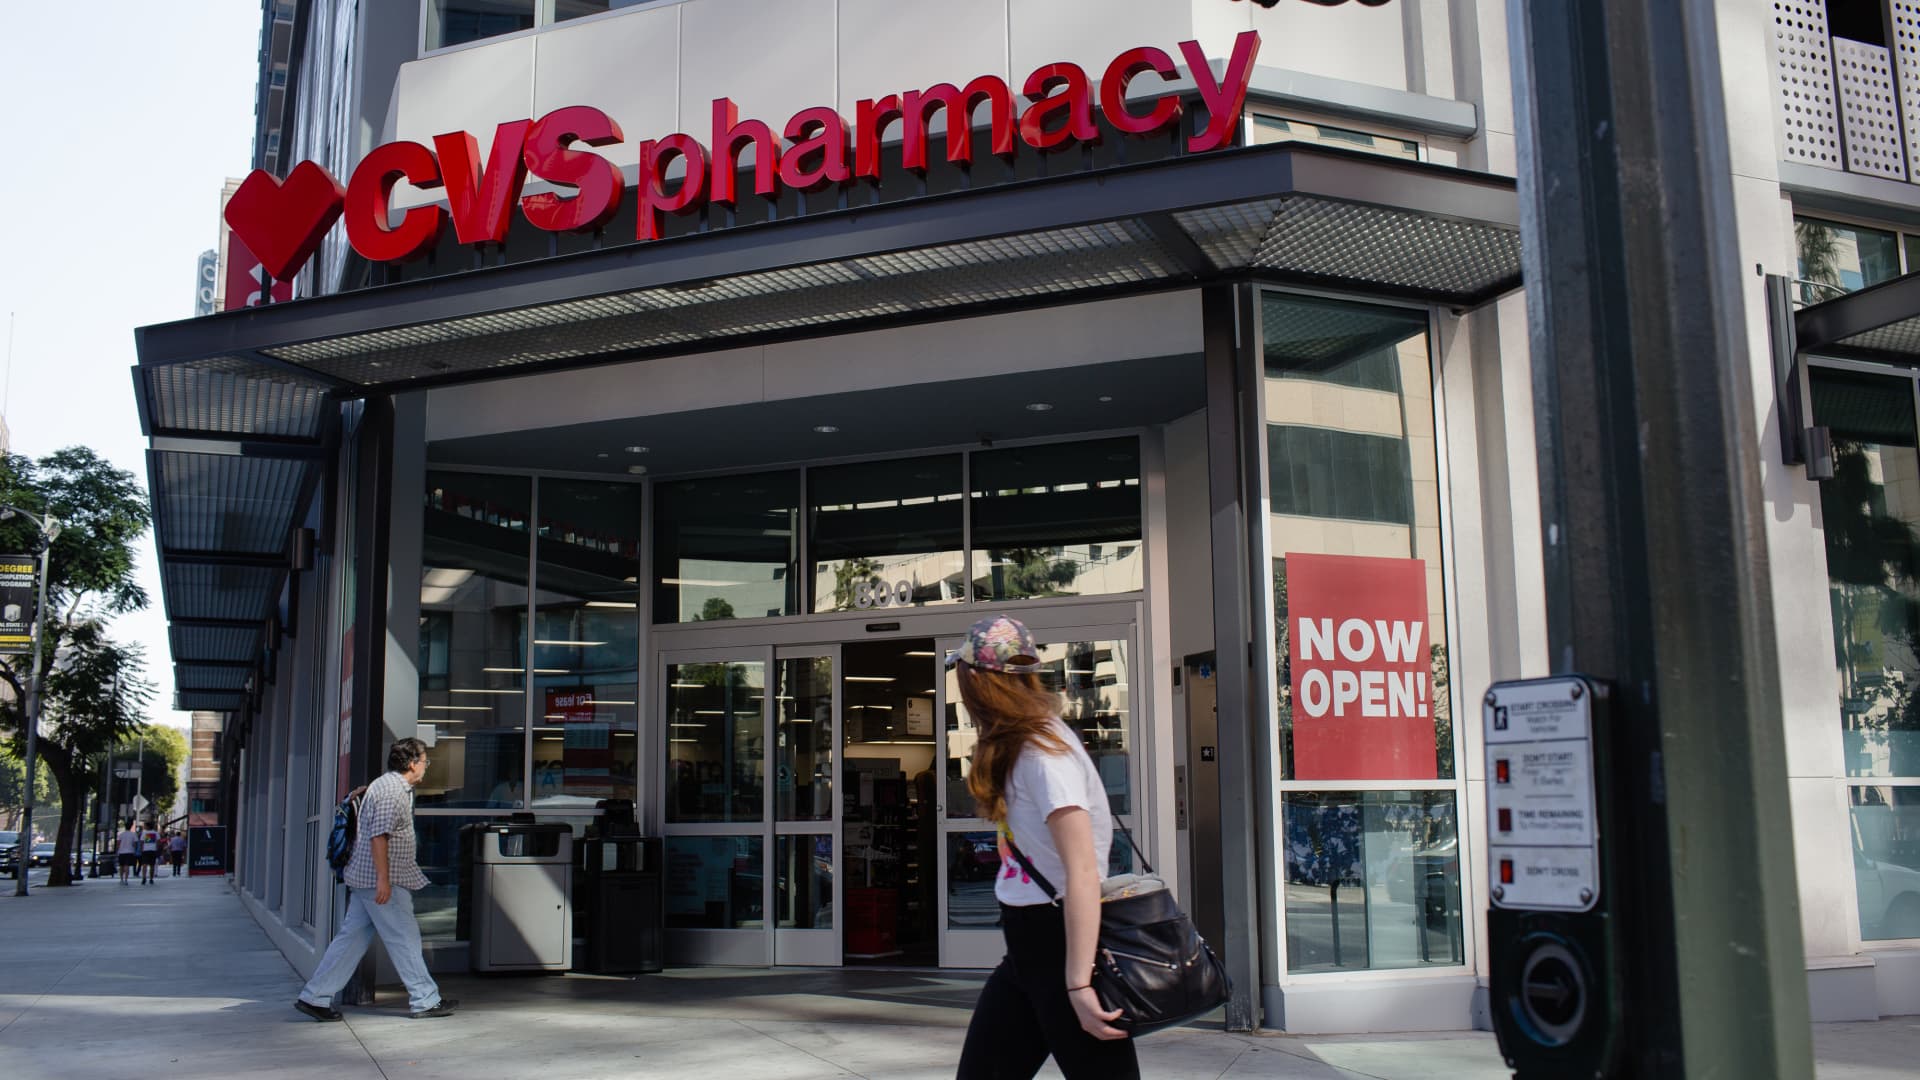 Stocks making the biggest moves midday: Gilead Sciences, CVS, Electronic Arts and more